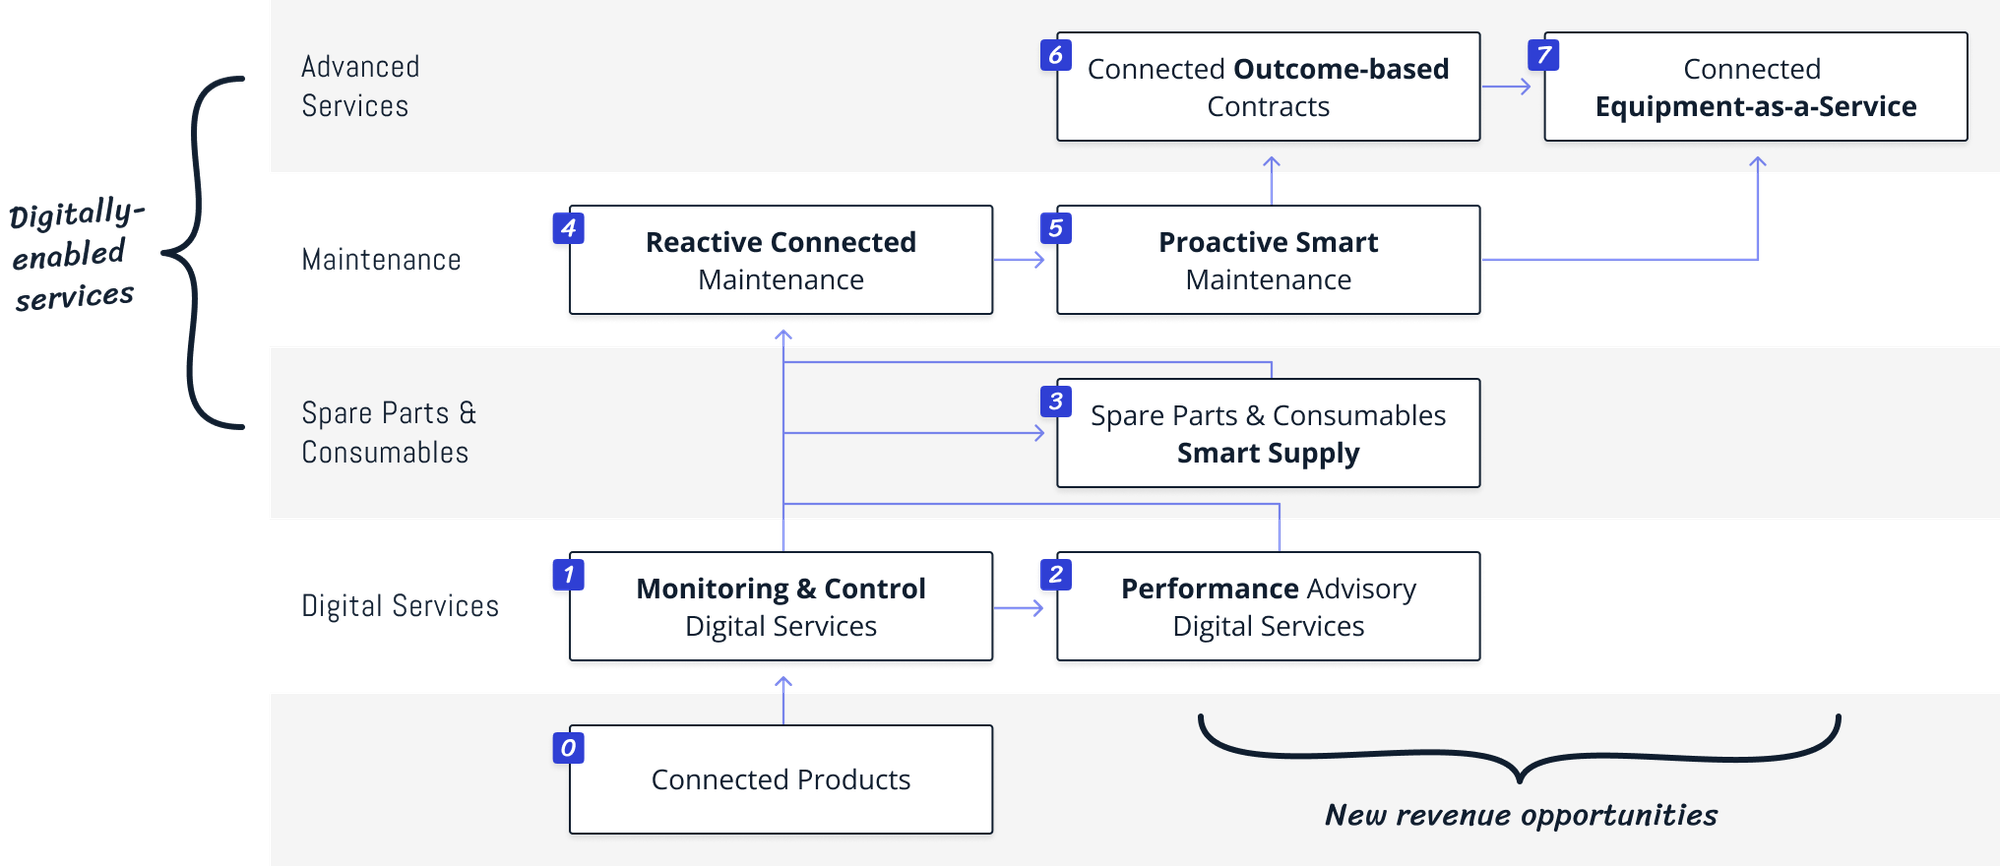 Routes for your Connected Services journey, from Connected Products to Connected Equipment-as-a-Service